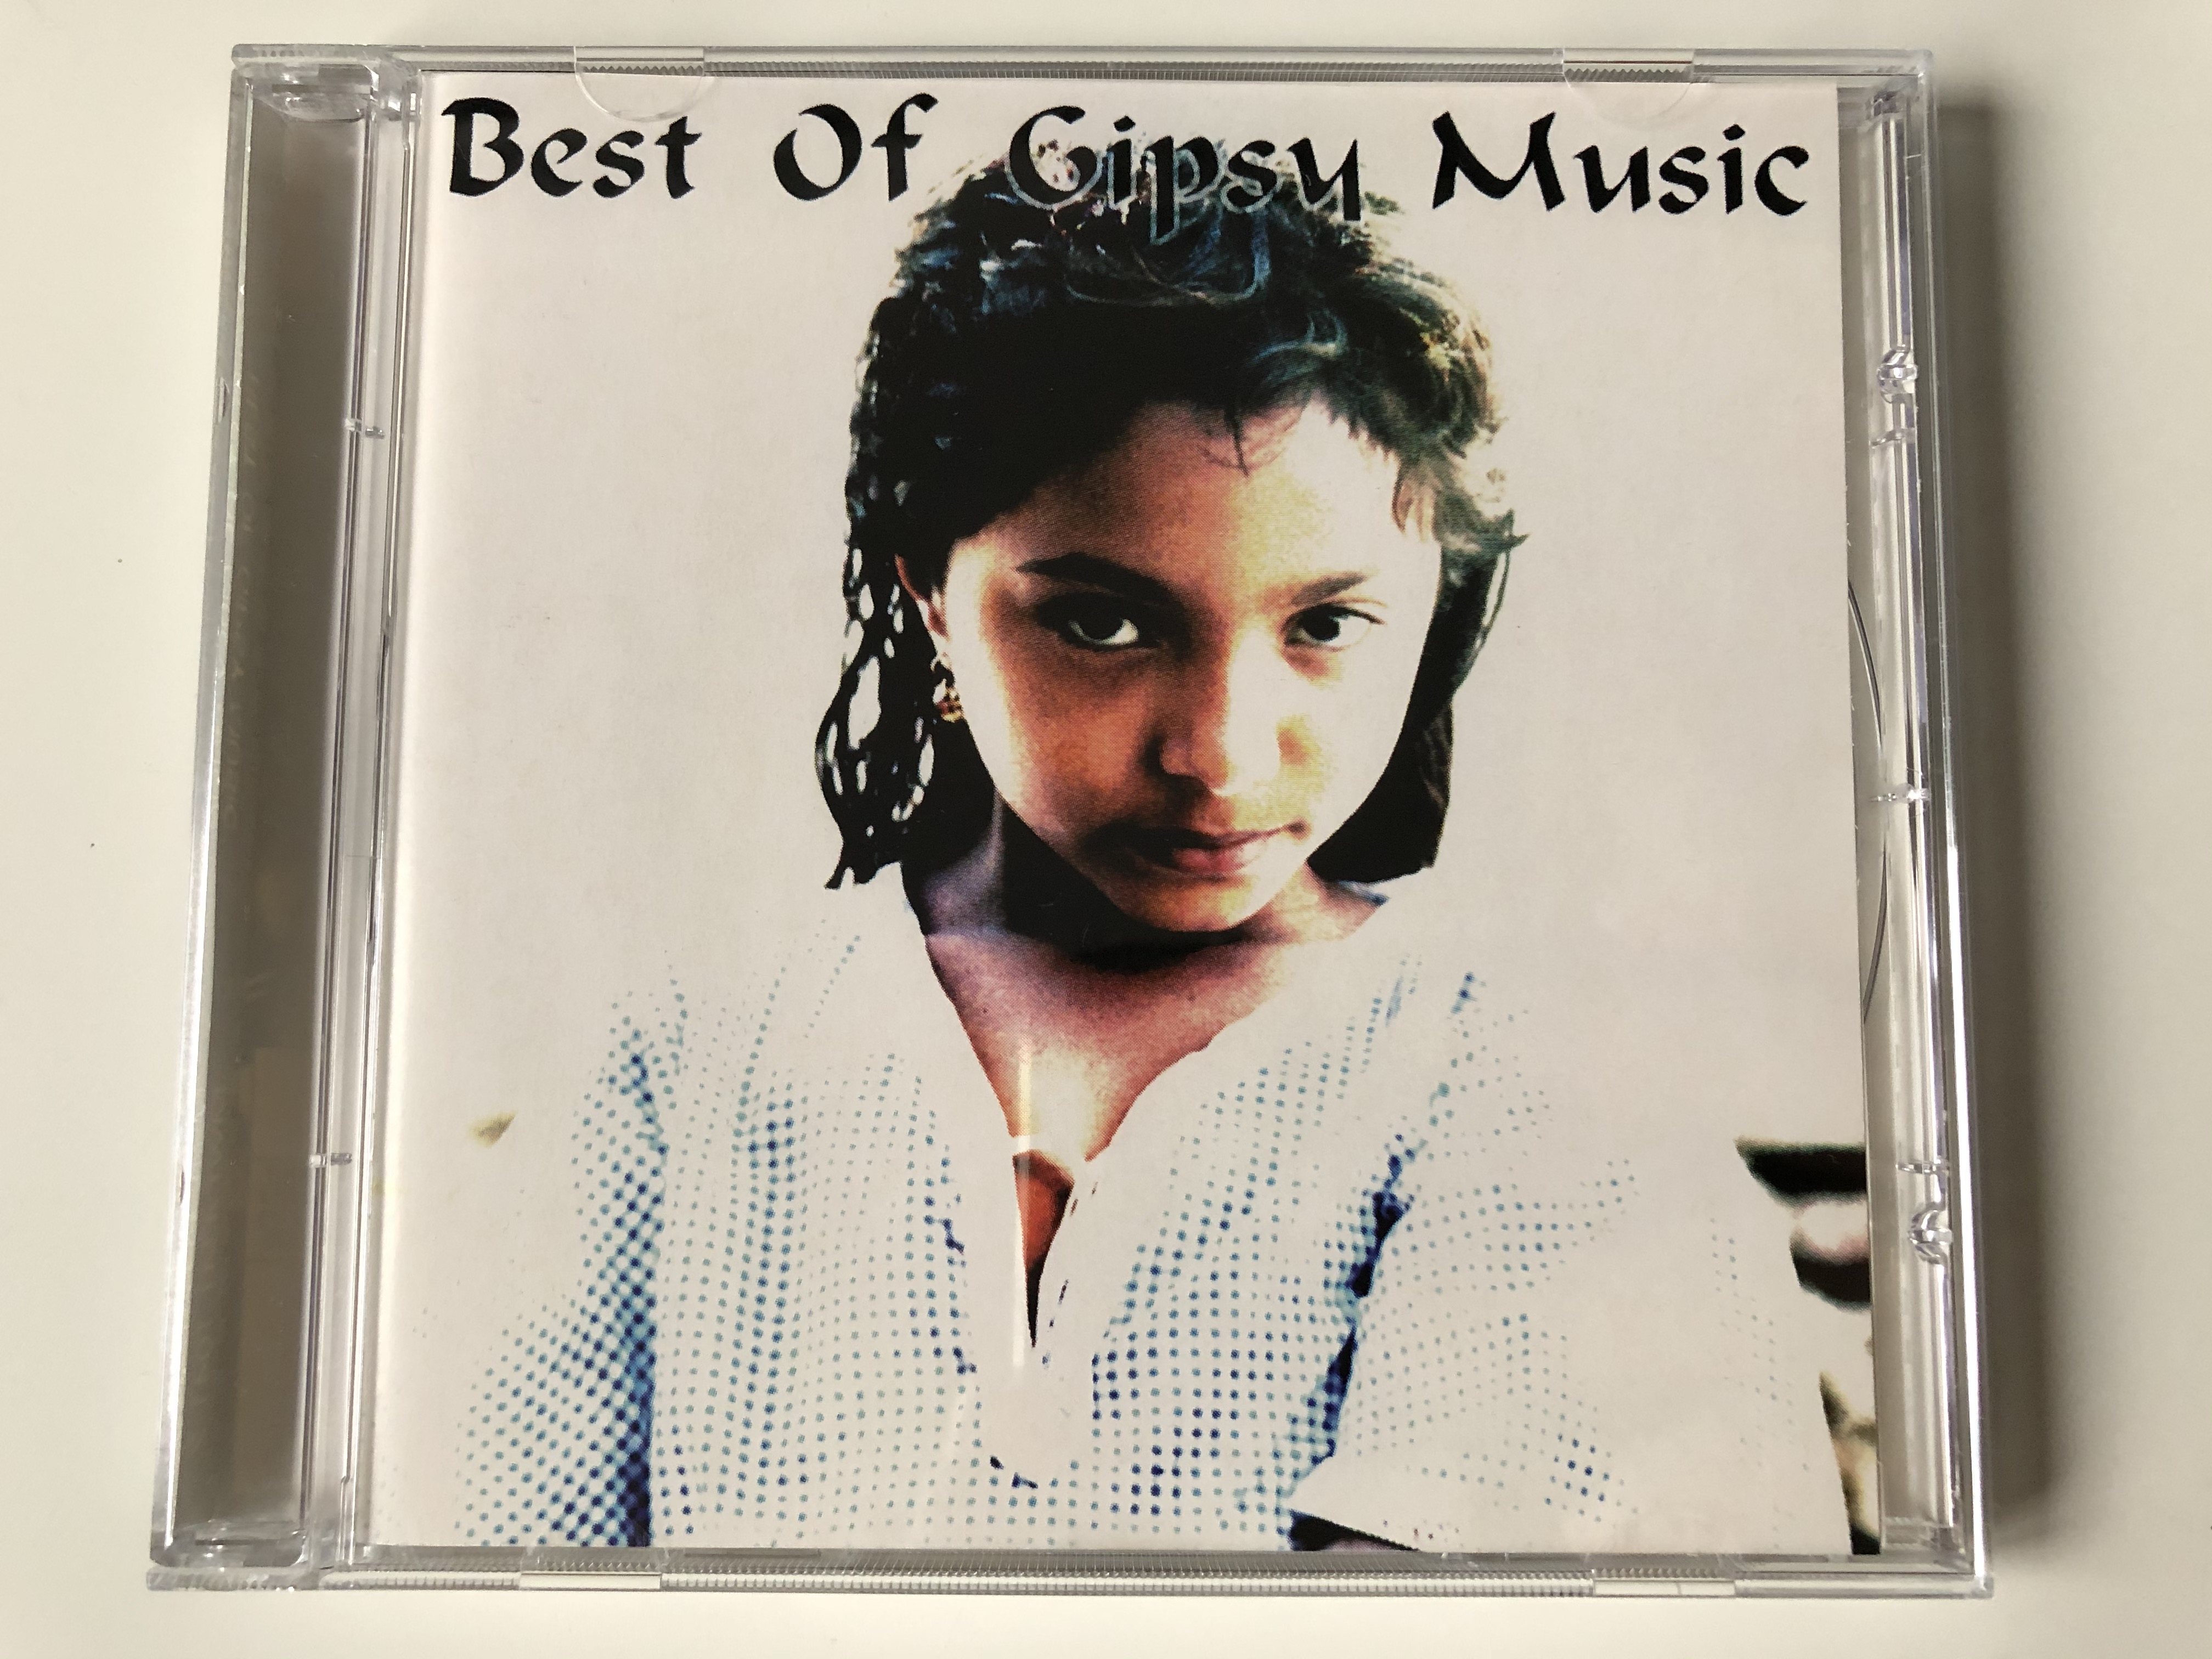 best-of-gipsy-music-2-cannon-records-audio-cd-1999-mwt-4341-1-.jpg